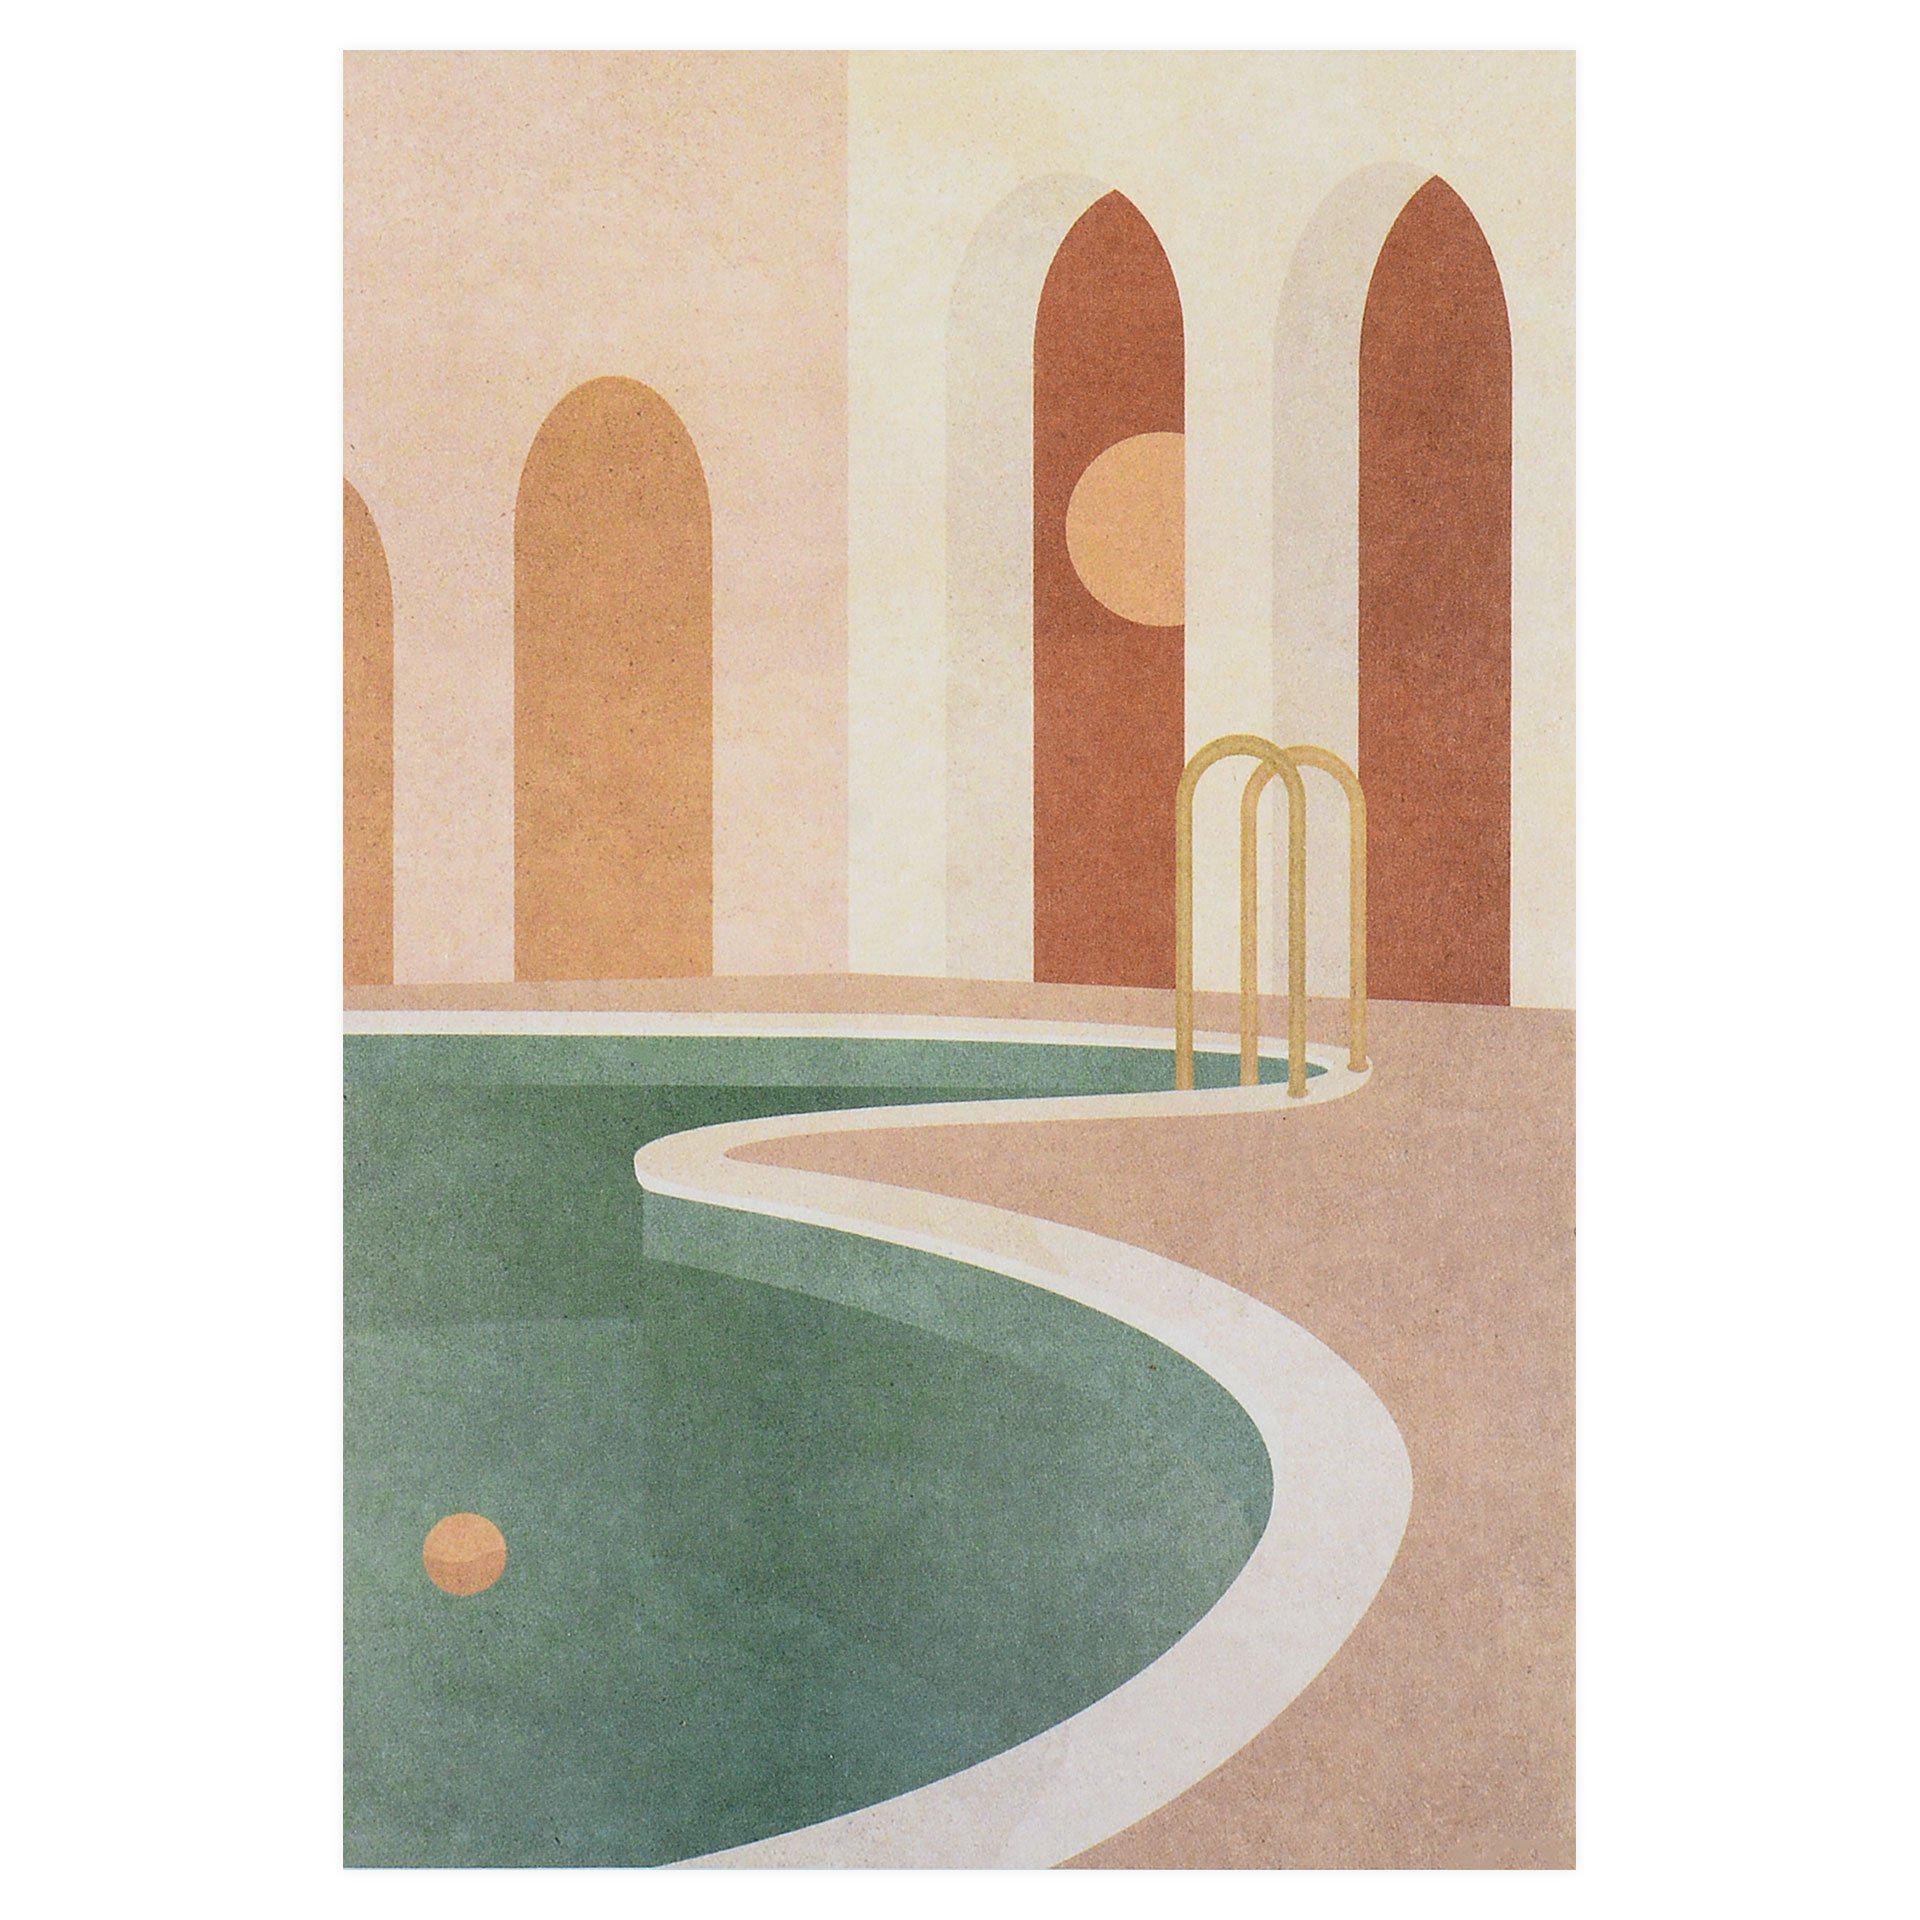 Wrap Pool With Arches Art Greeting Card 